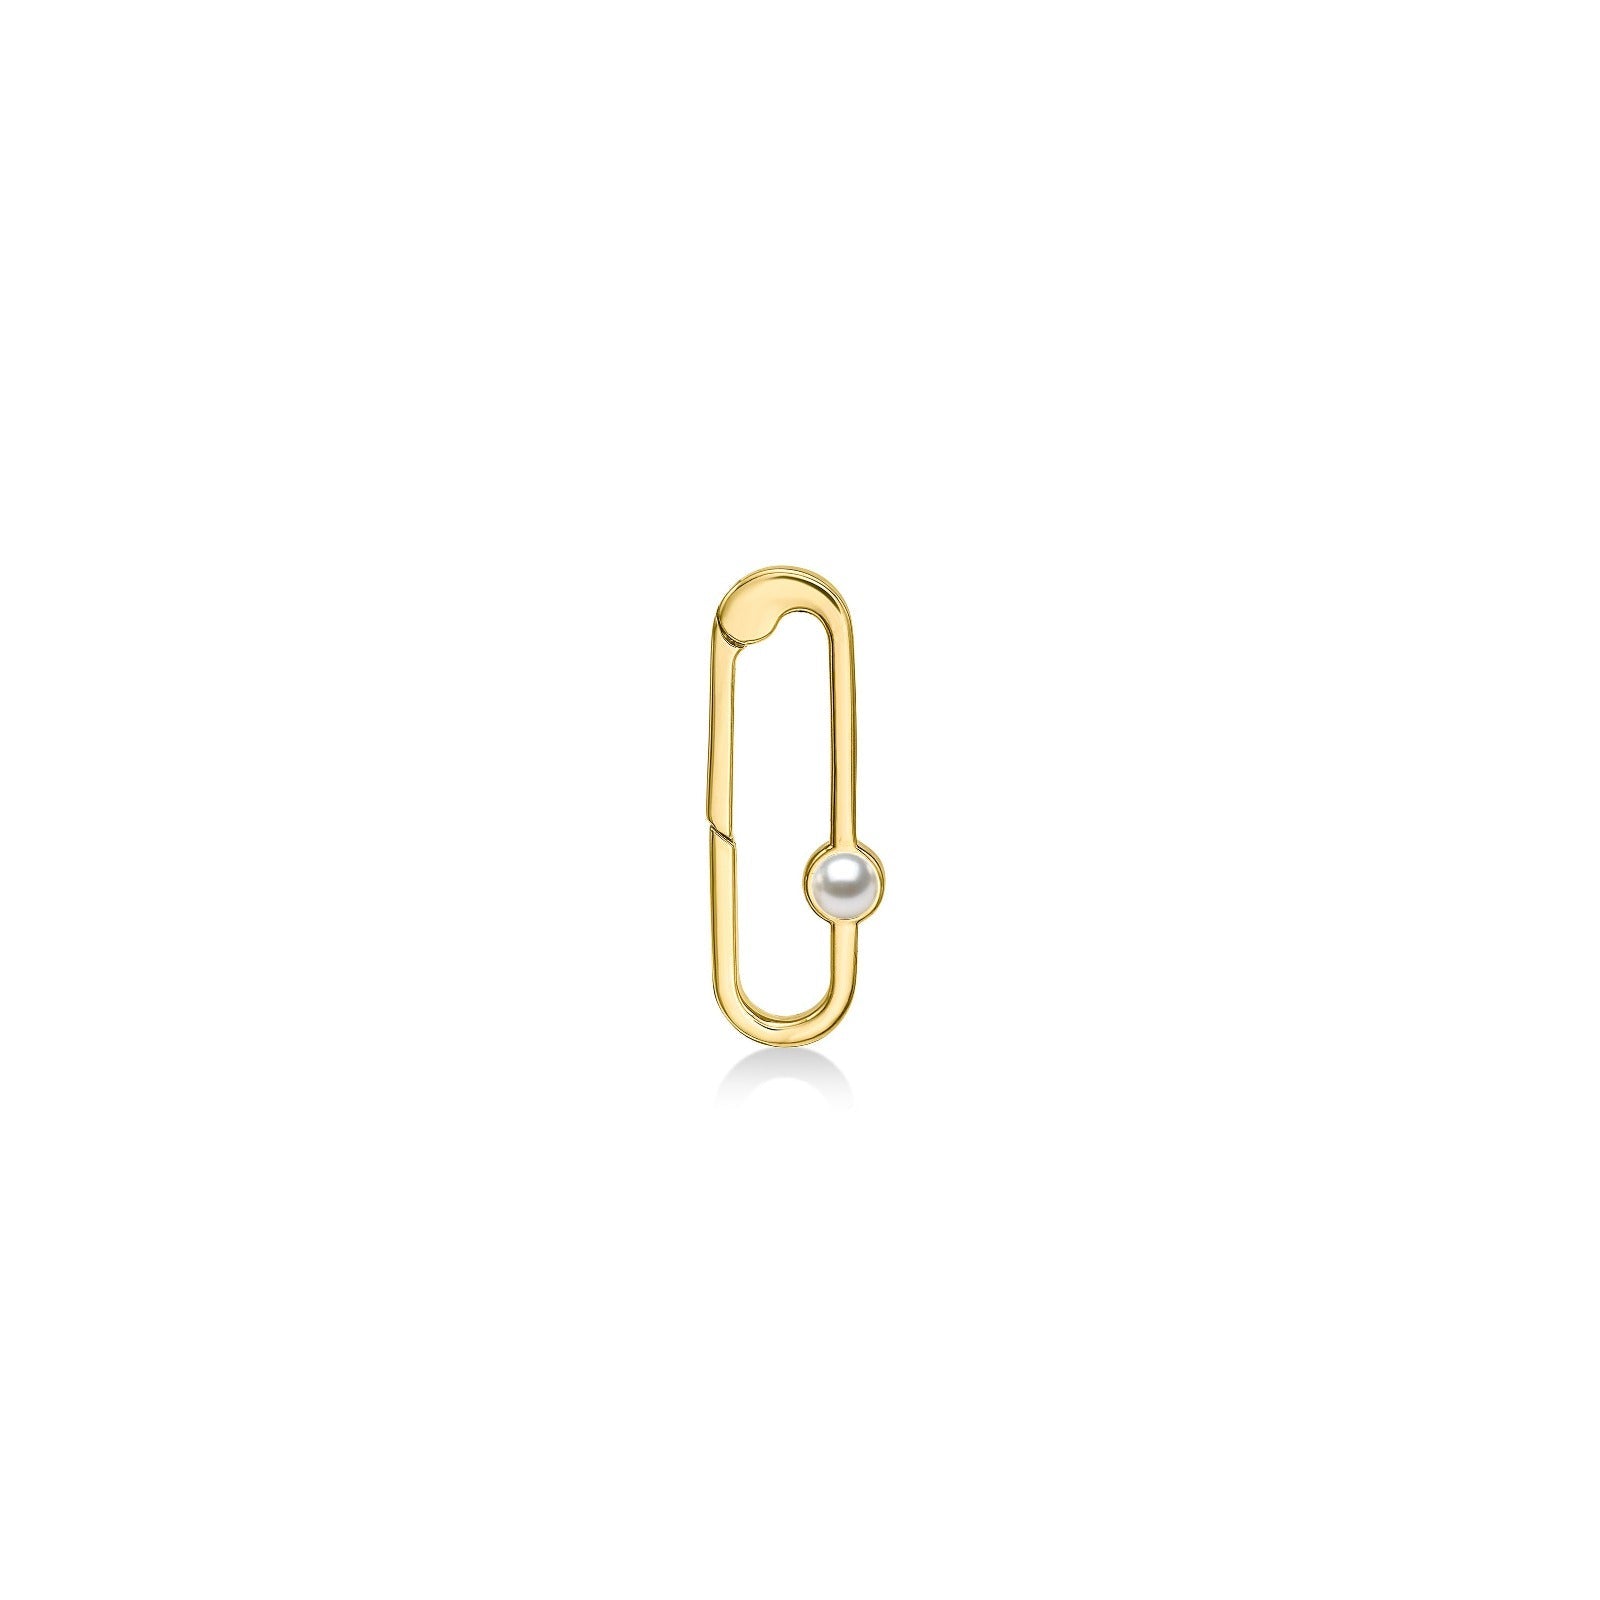 14k gold paperclip charm lock with pearl